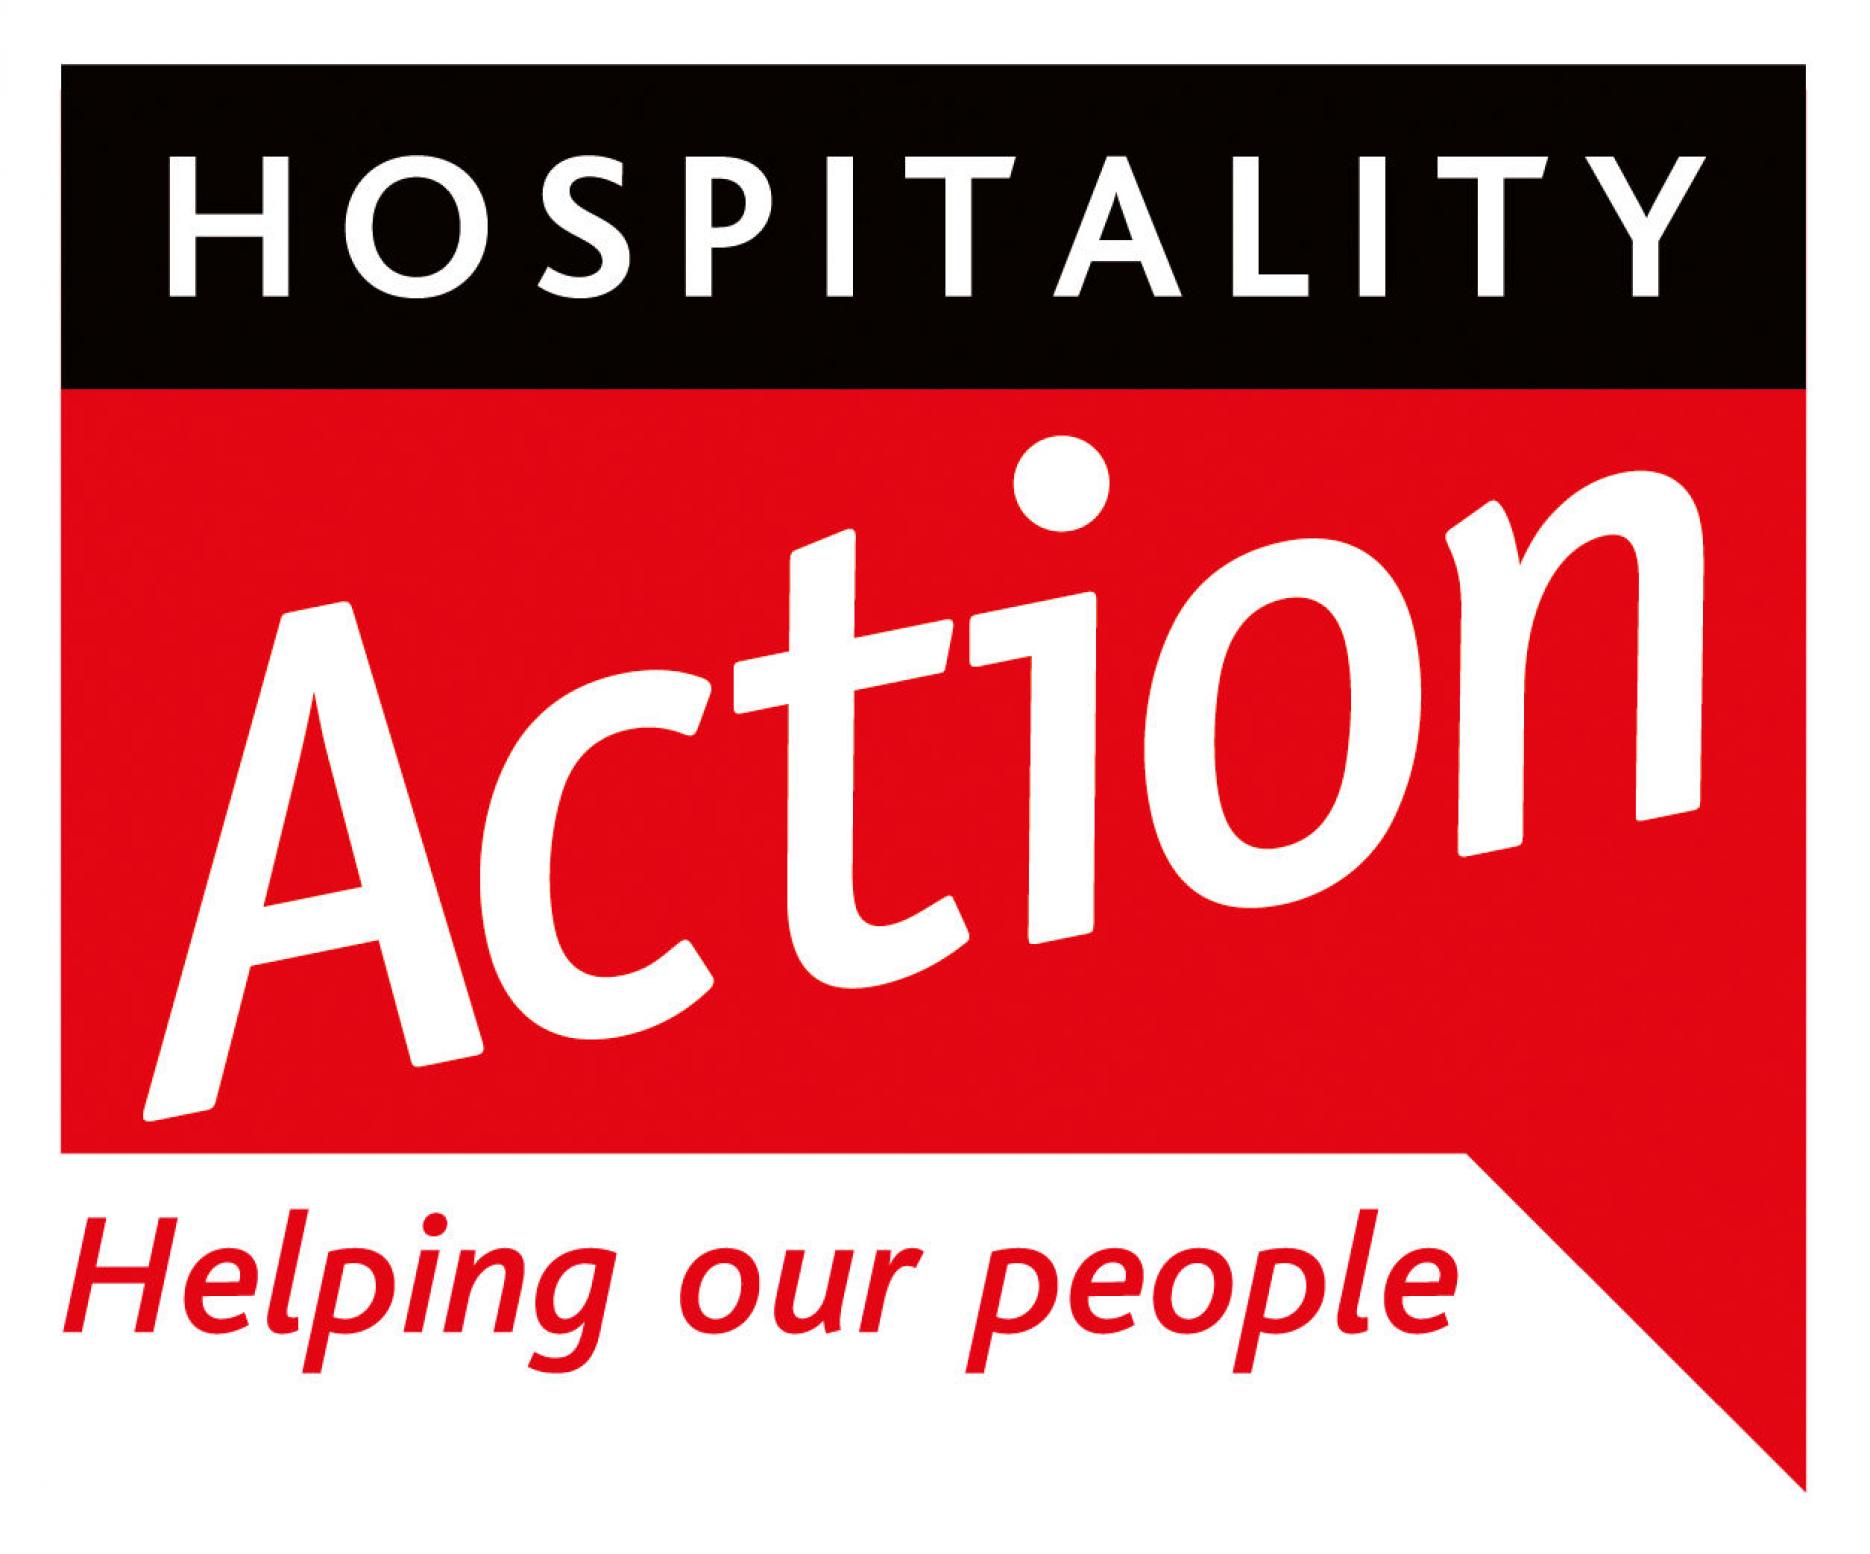 Charity Hospitality Action relaunches Addiction Awareness Programme 